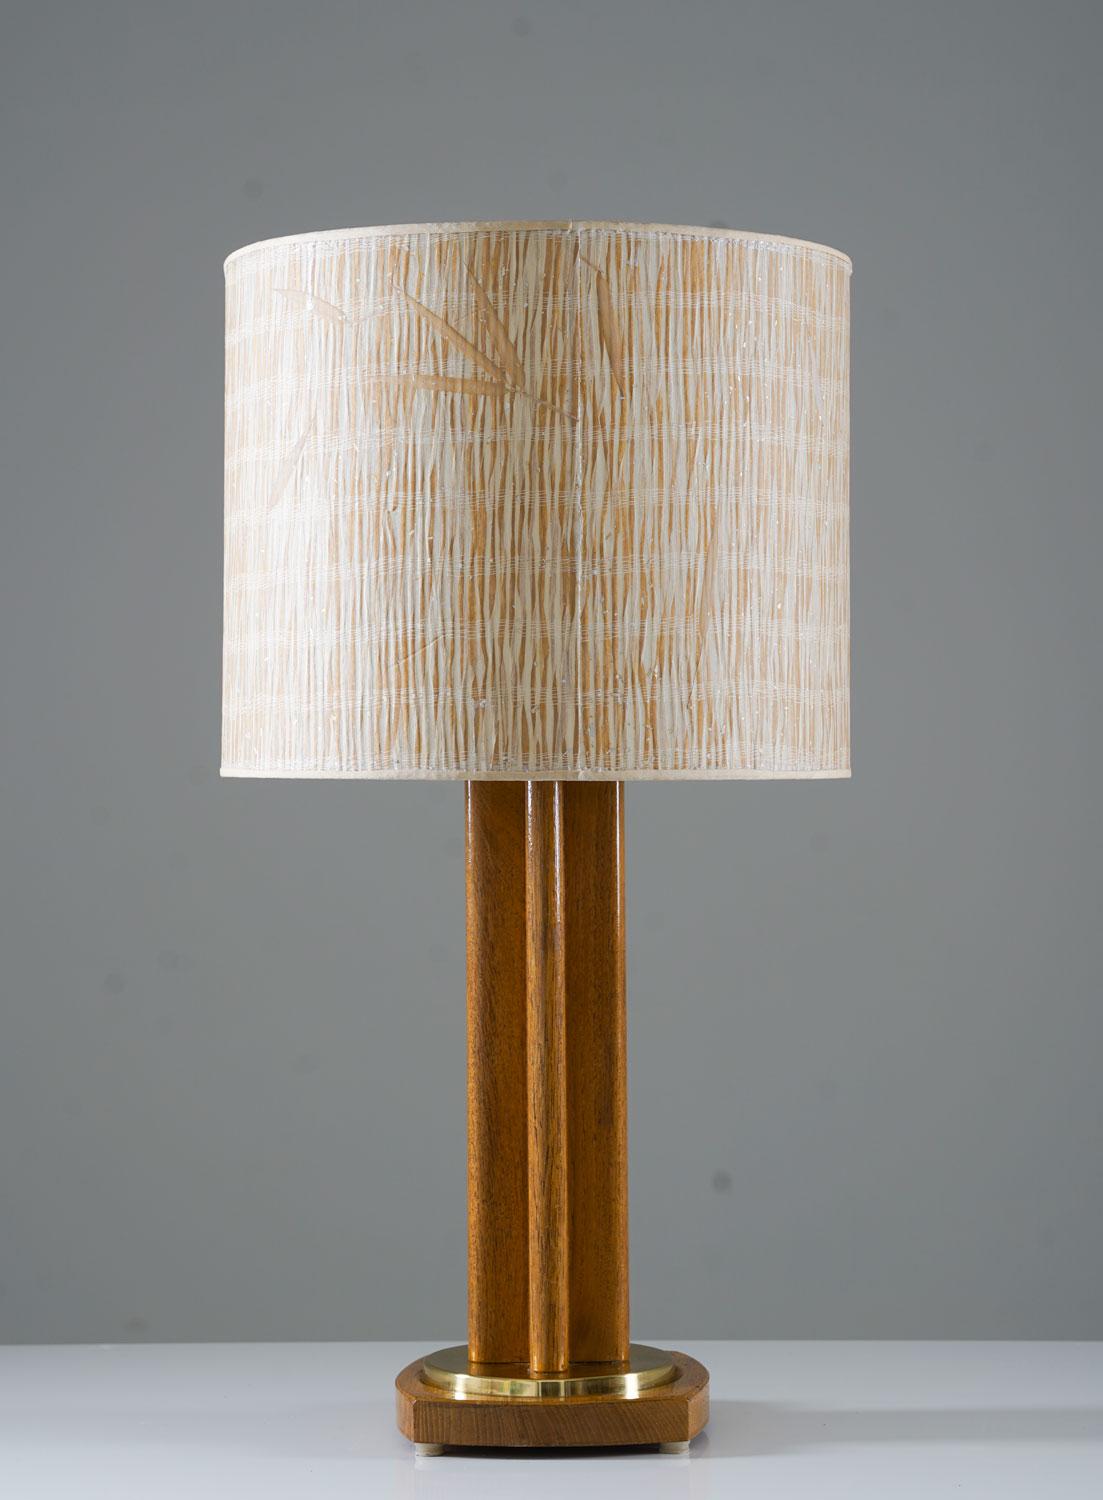 Large Scandinavian midcentury table lamp in oak and brass by Möllers Armatur Elektriska, Sweden, 1950s. 
This lamp is made of oak with details in brass. The lamp comes with a stunning vintage cylinder-shaped shade decorated with leaves of grass.